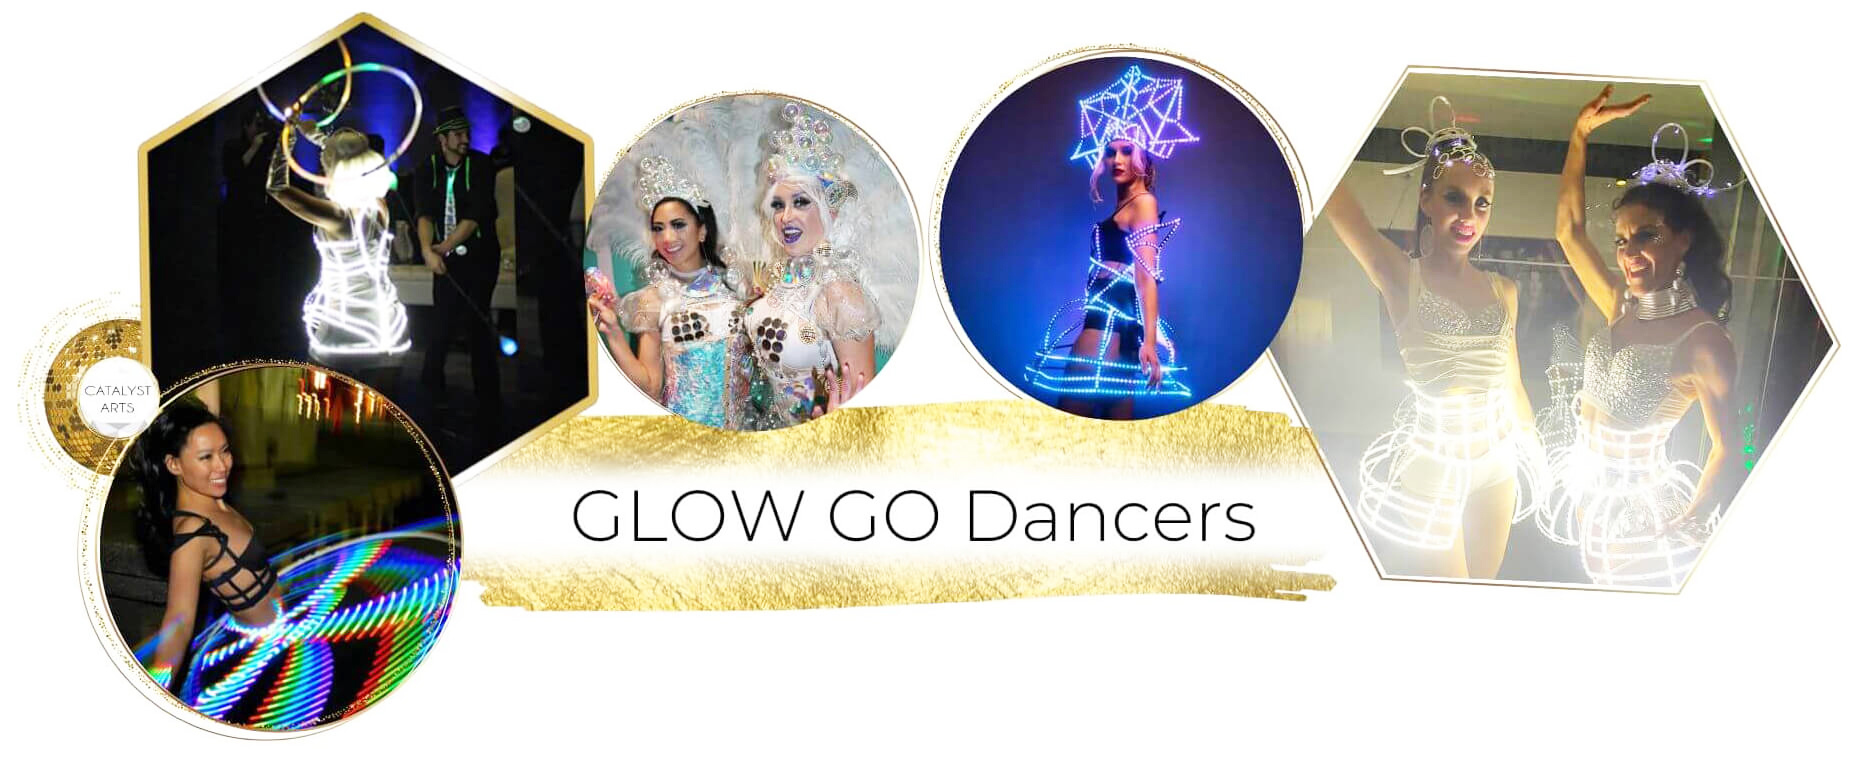 Glow Go Dancers- LED cirque & dance  Entertainment by Catalyst Arts in California 